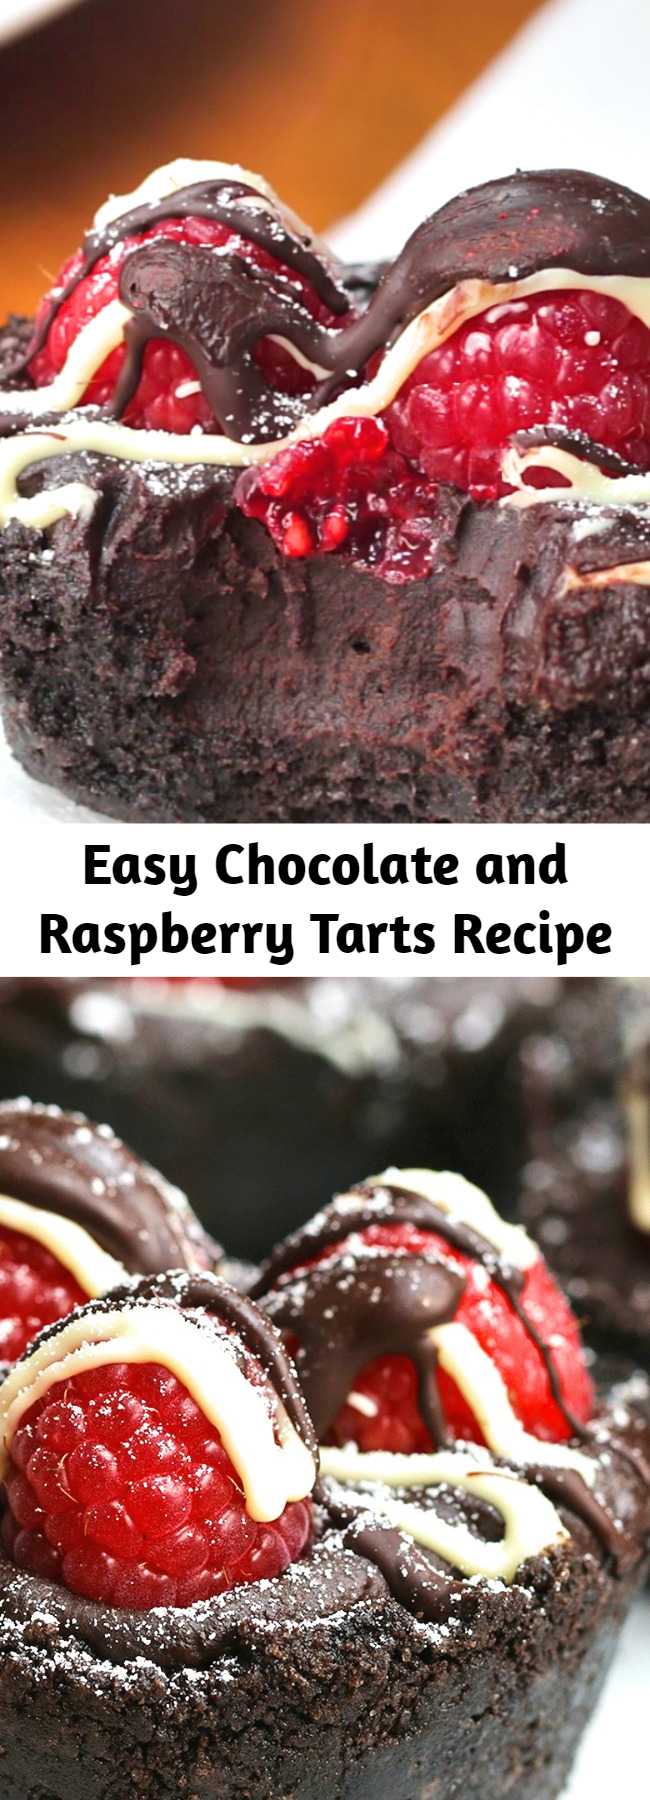 Easy Chocolate and Raspberry Tarts Recipe - This simple, decadent tart will keep overnight in the refrigerator (top with raspberries just before serving). Try it with vanilla ice cream or whipped cream.